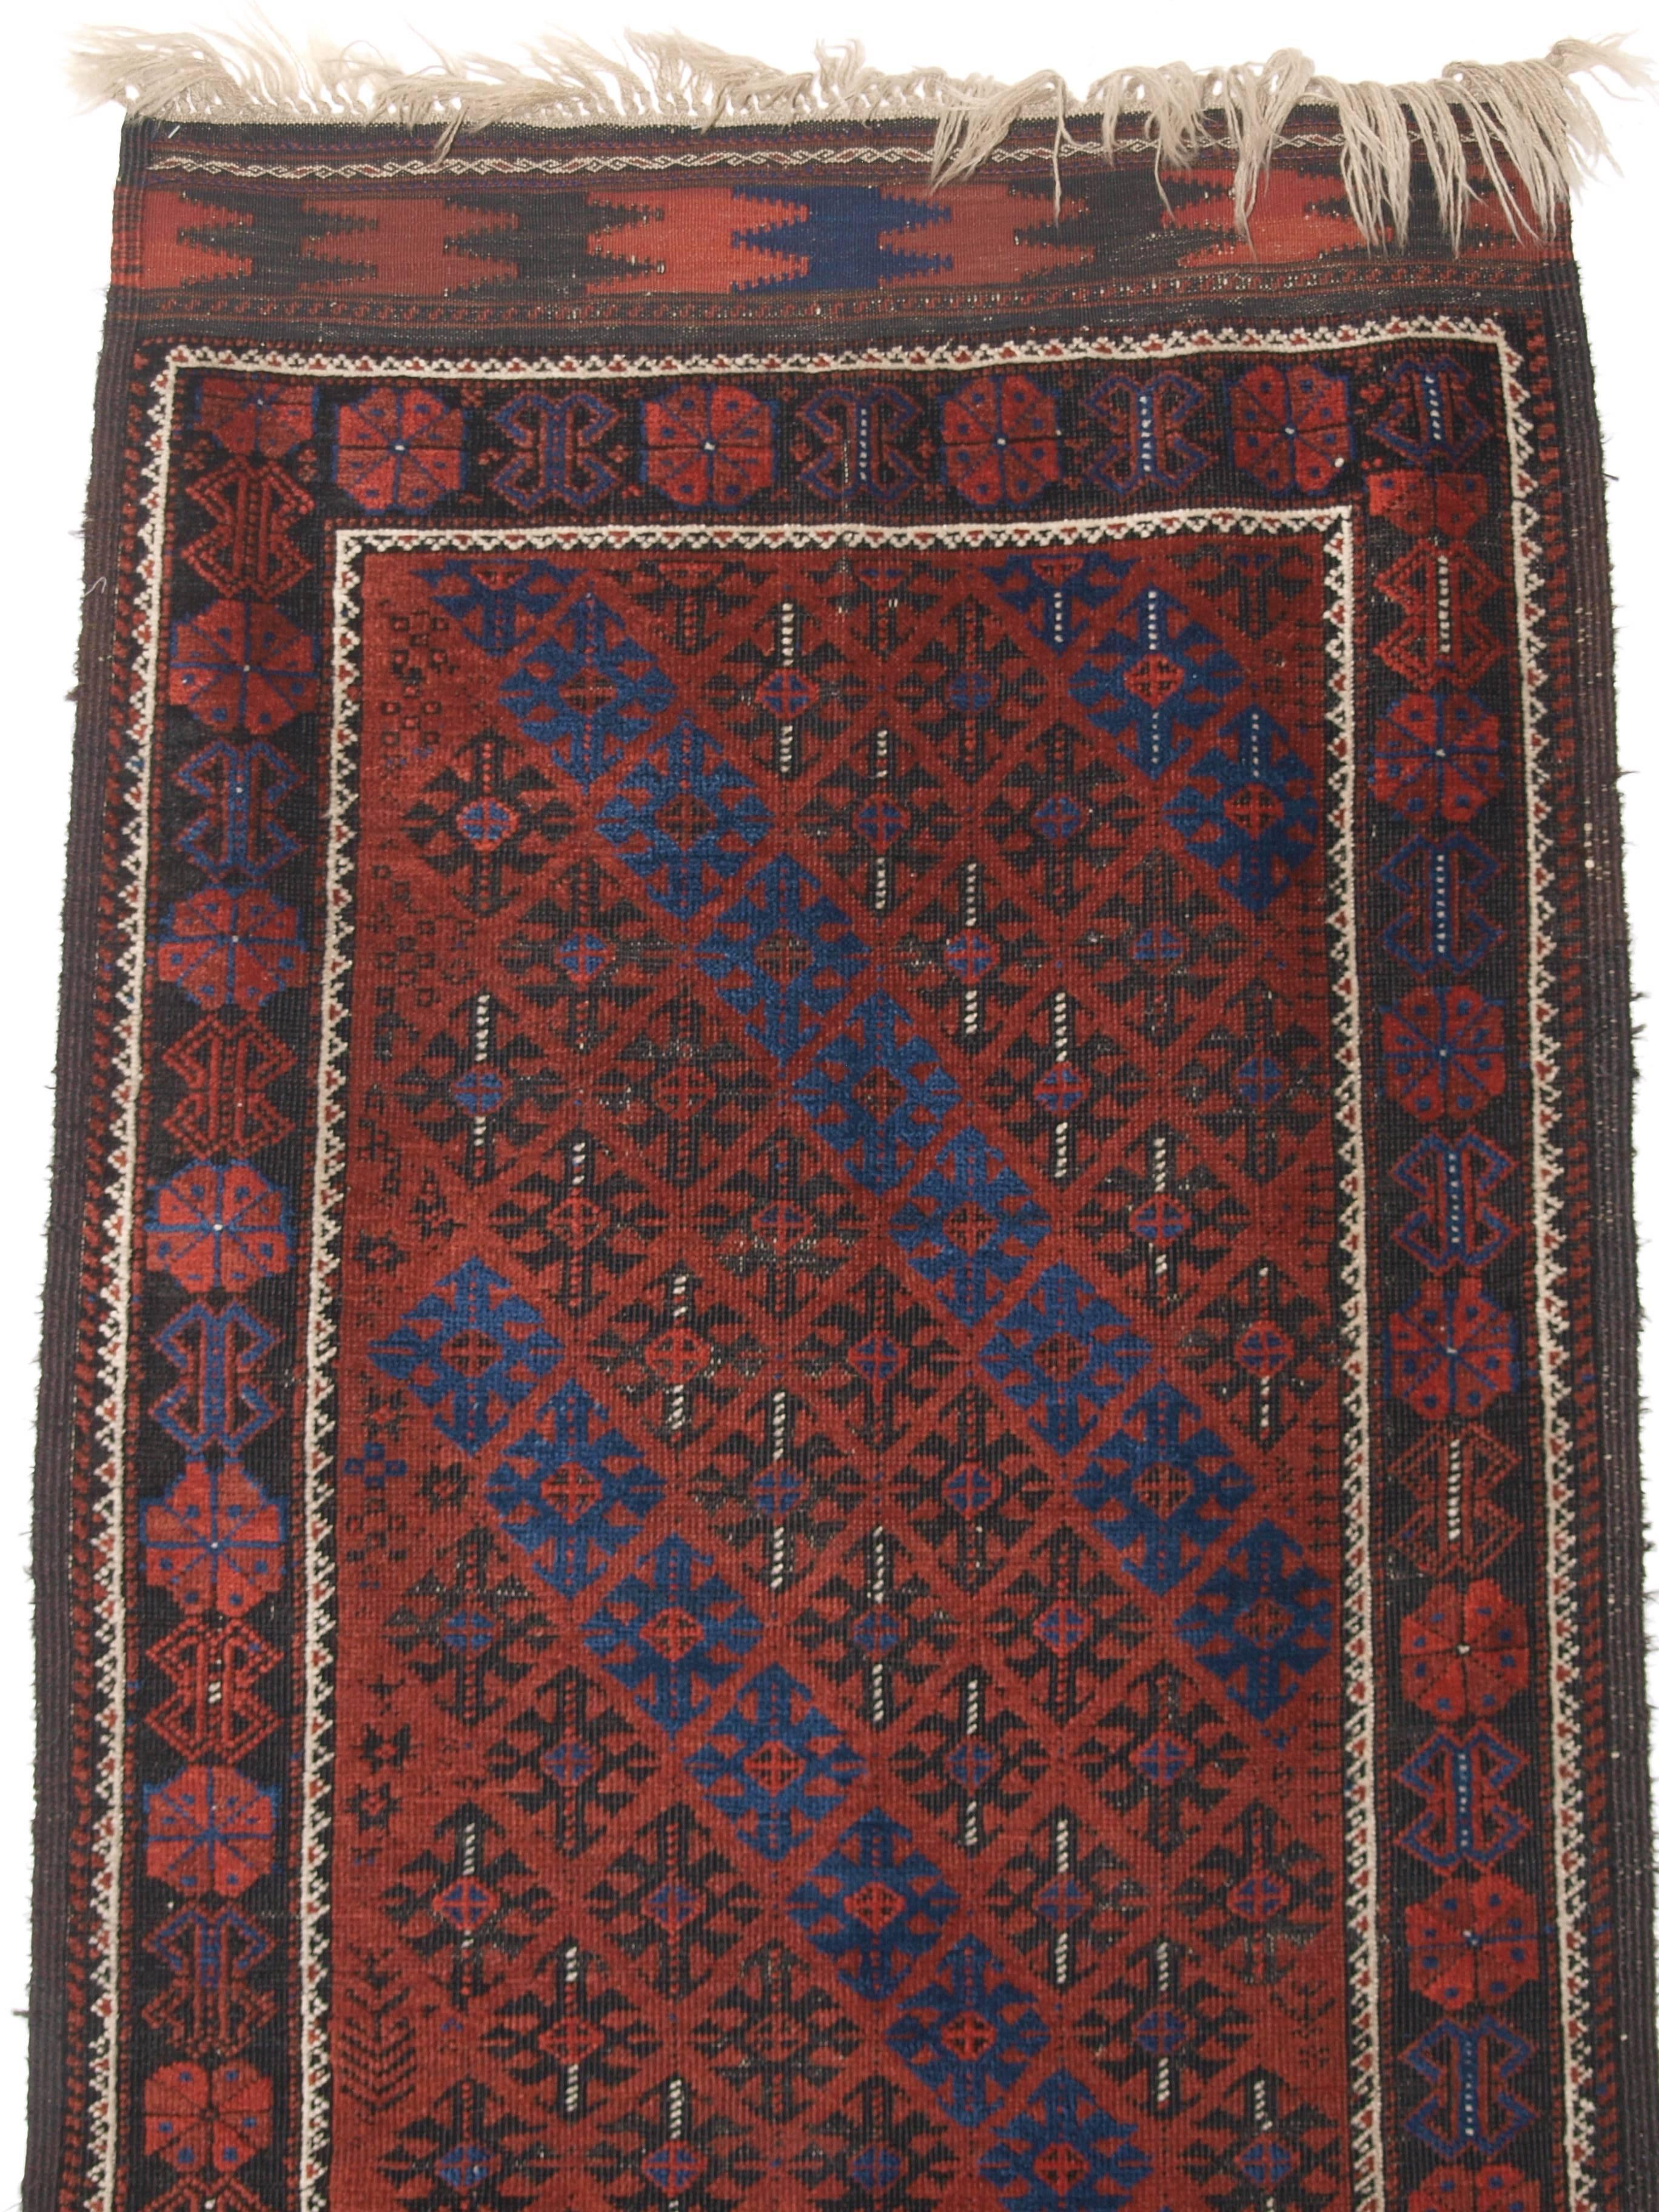 Antique Baluch Rug from Western Afghanistan, Probably Timuri Tribe, circa 1880 In Excellent Condition For Sale In Moreton-in-Marsh, GB